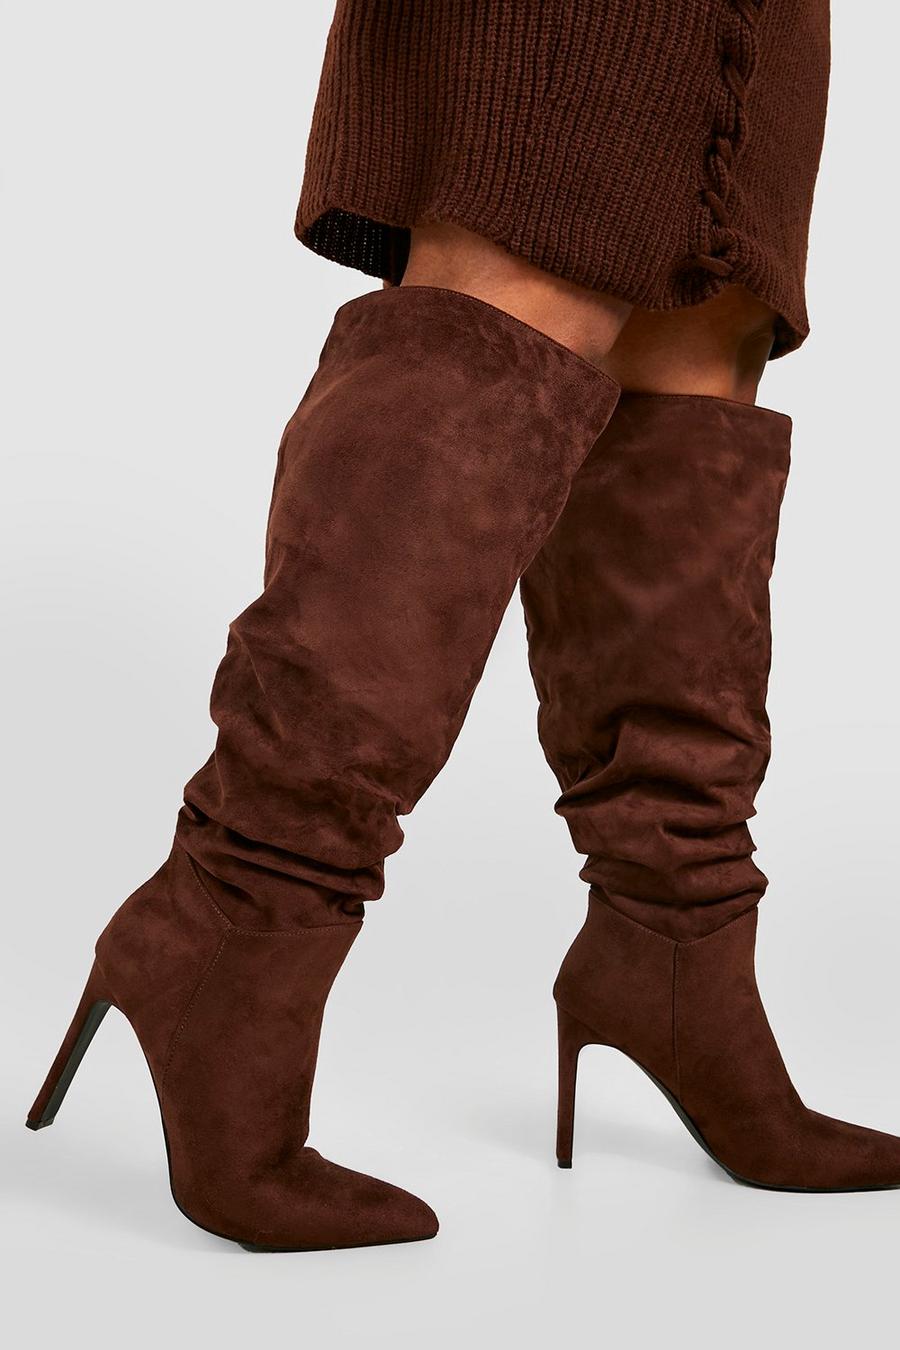 Chocolate brown Wide Calf Ruched Detail Knee High Boots